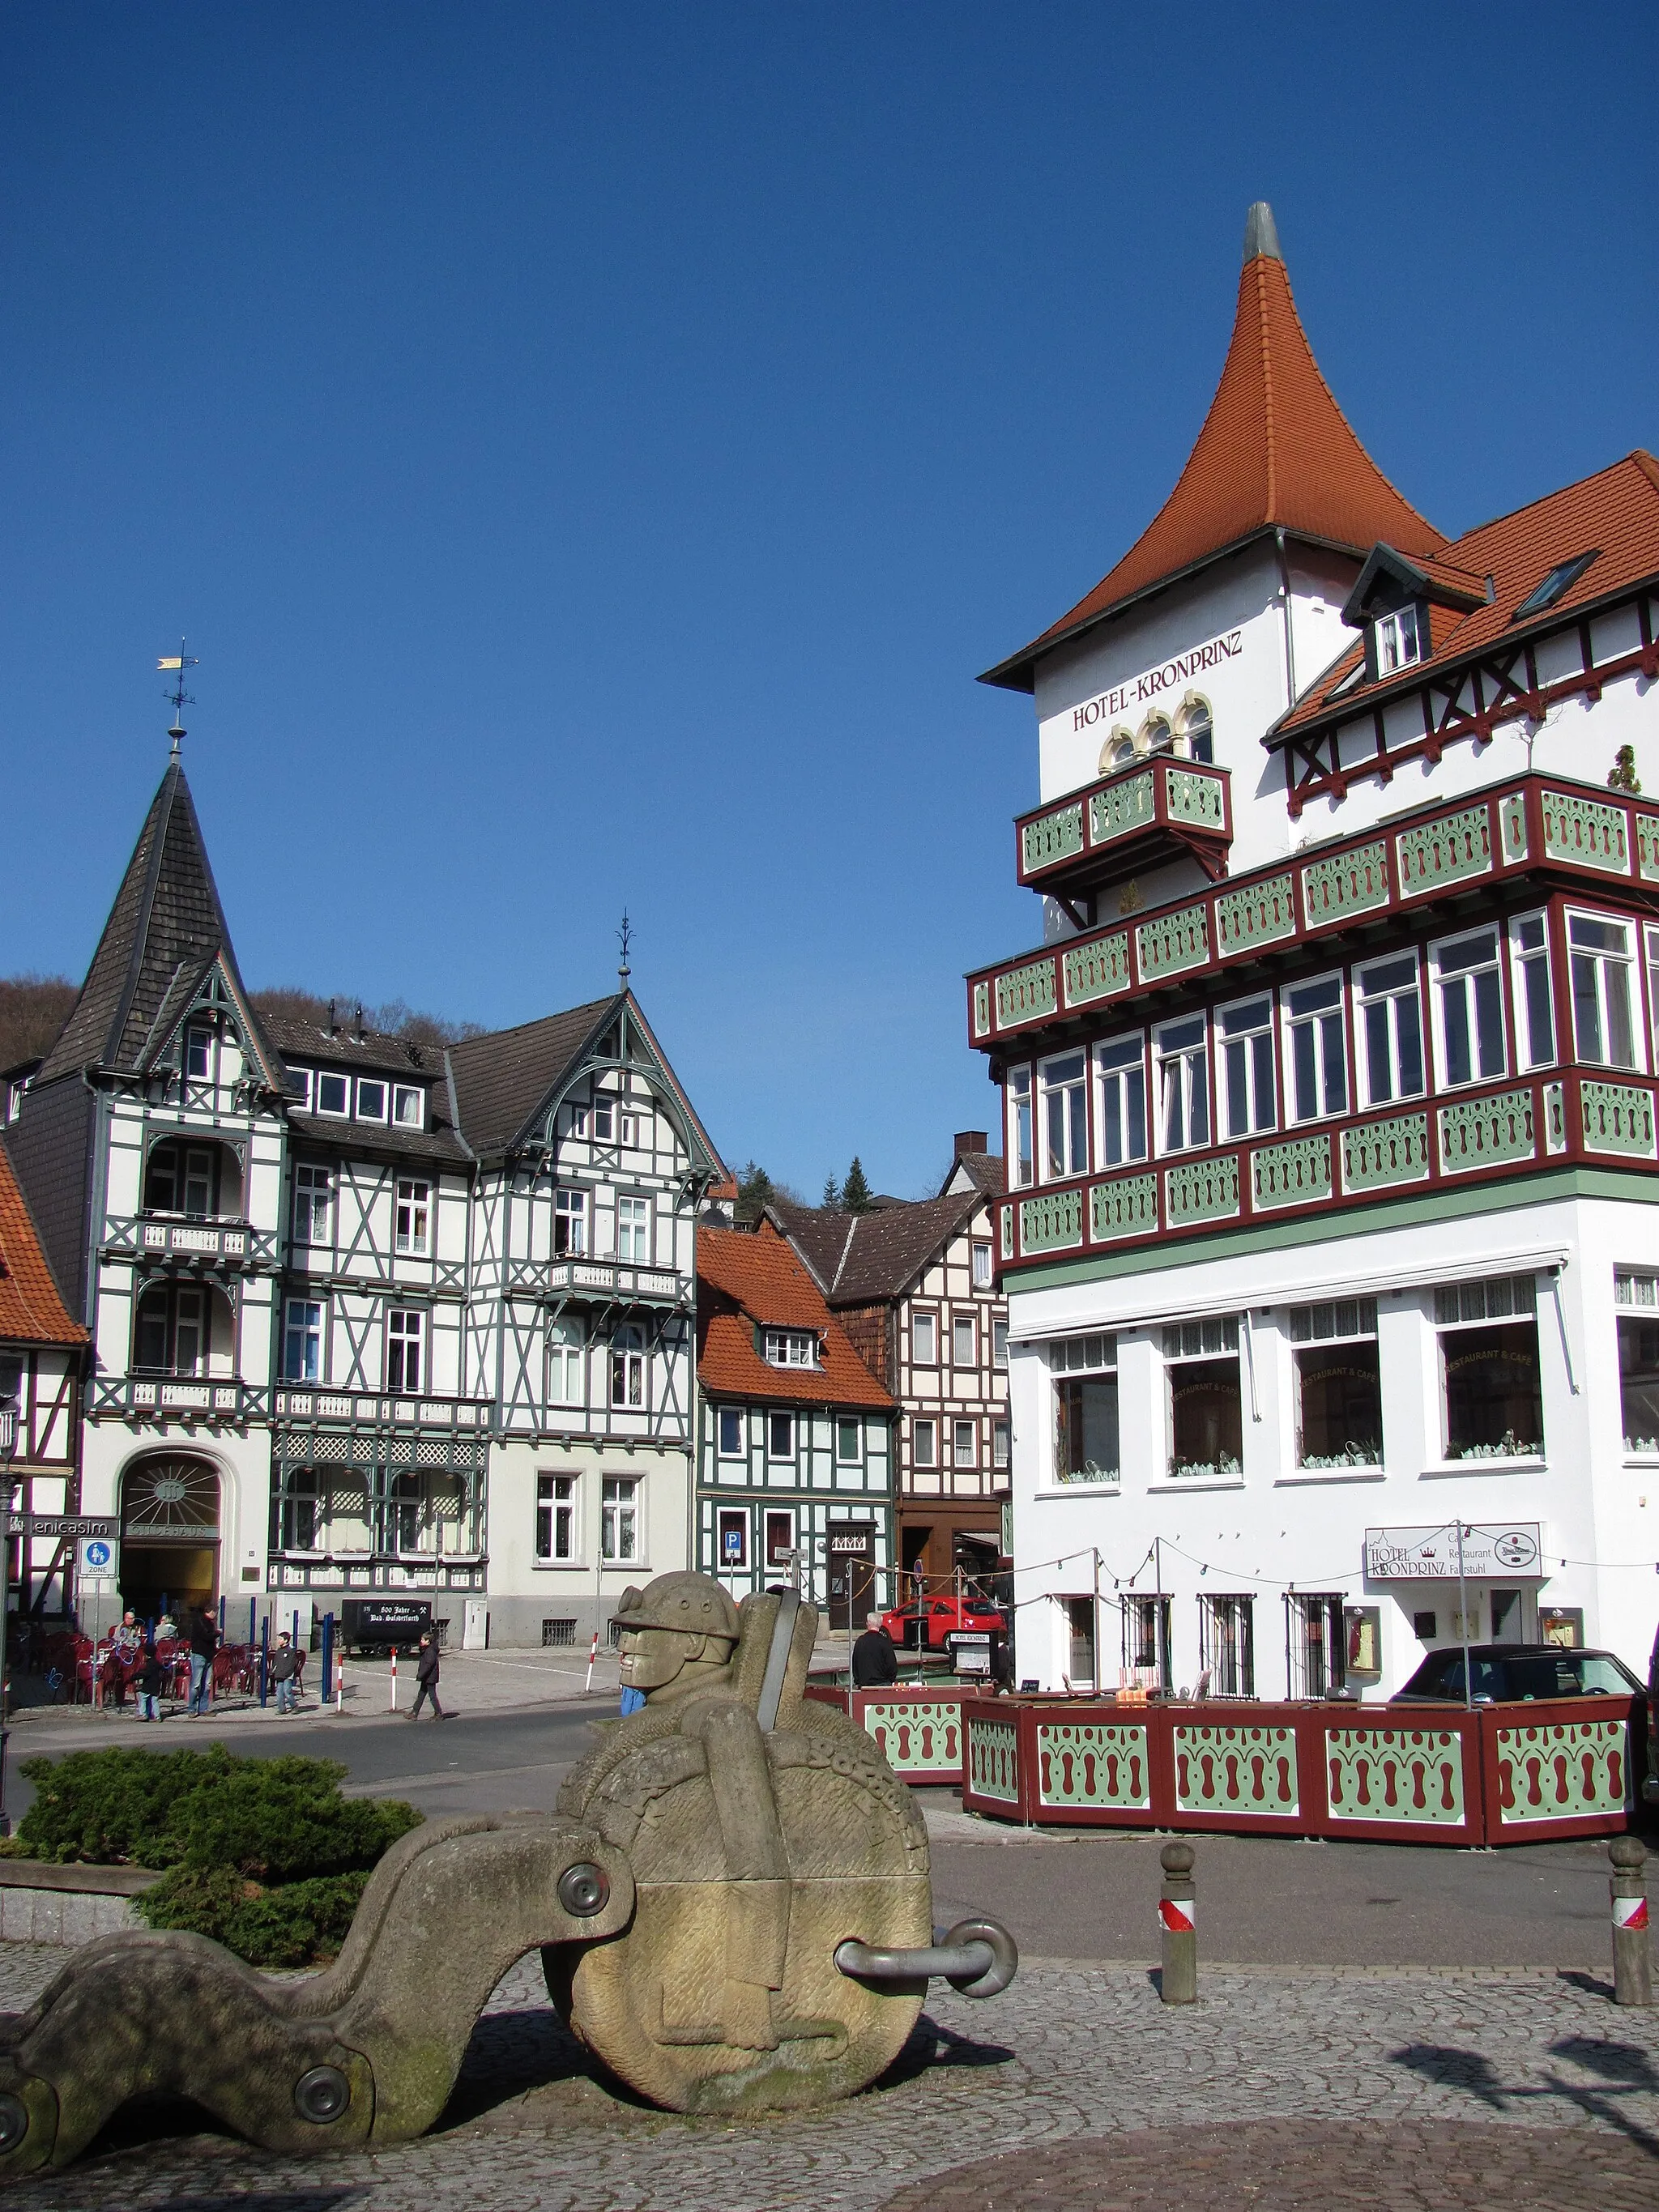 Photo showing: Miners' Guildhall and Memorial, Bad Salzdetfurth, Lower Saxony, Germany